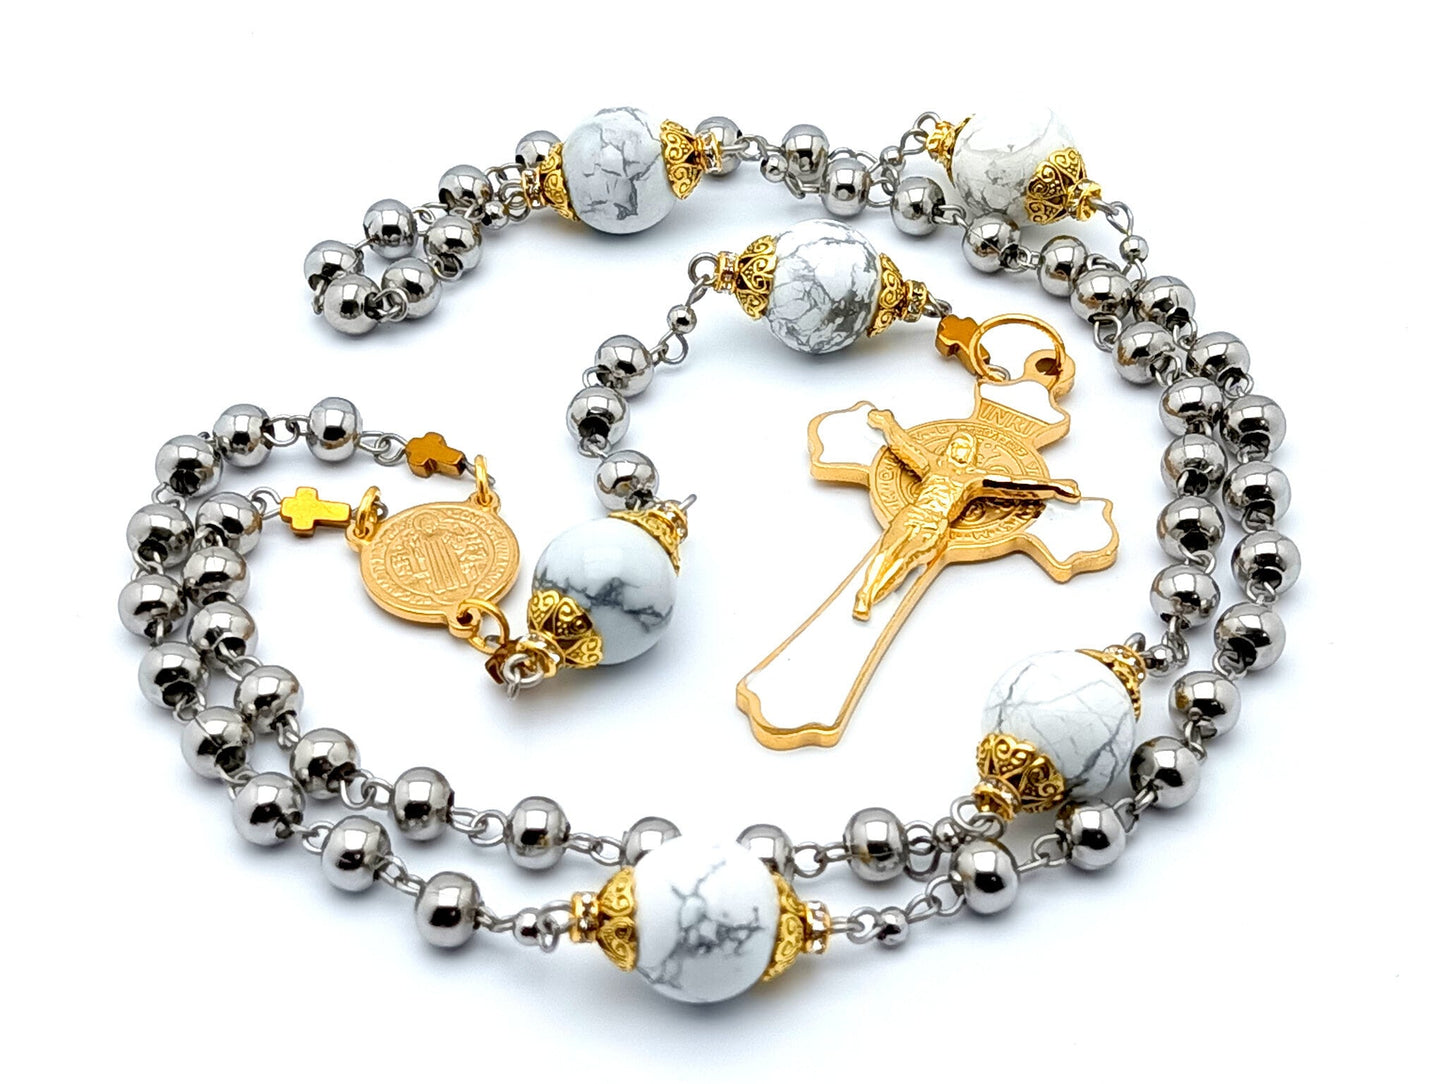 Saint Benedict unique rosary beads with stainless steel and white beads, stainless steel gold plated and white enamel crucifix and gold plated stainless steel centre medal.